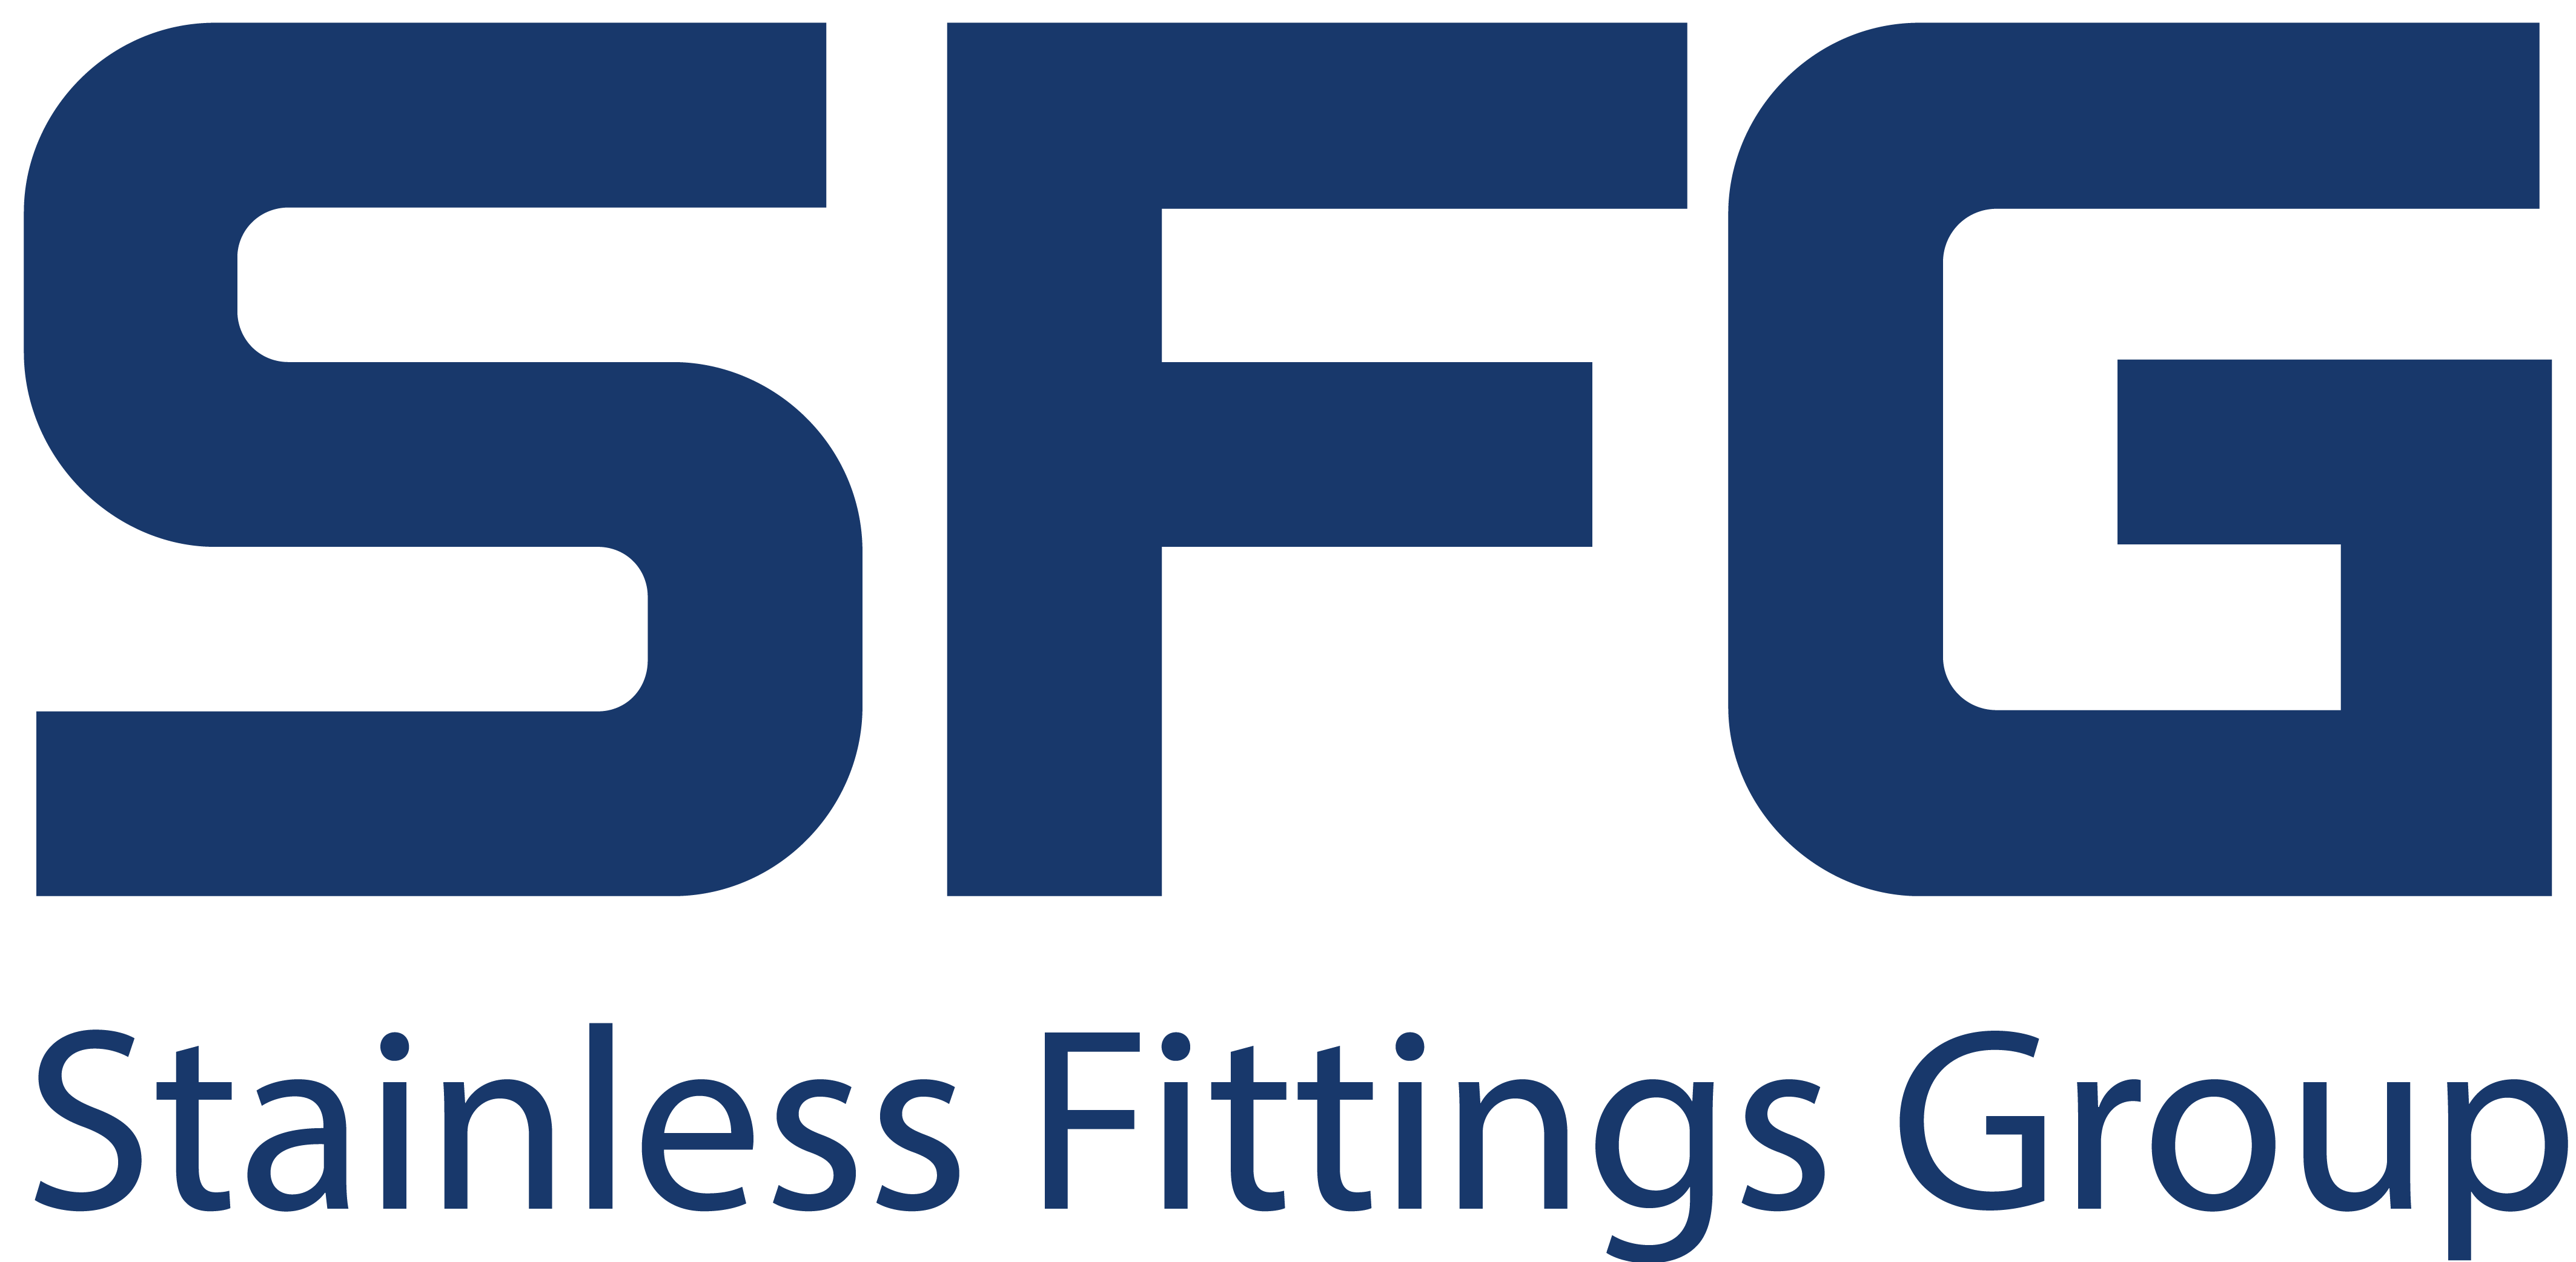 Stainless Fittings Group Logo